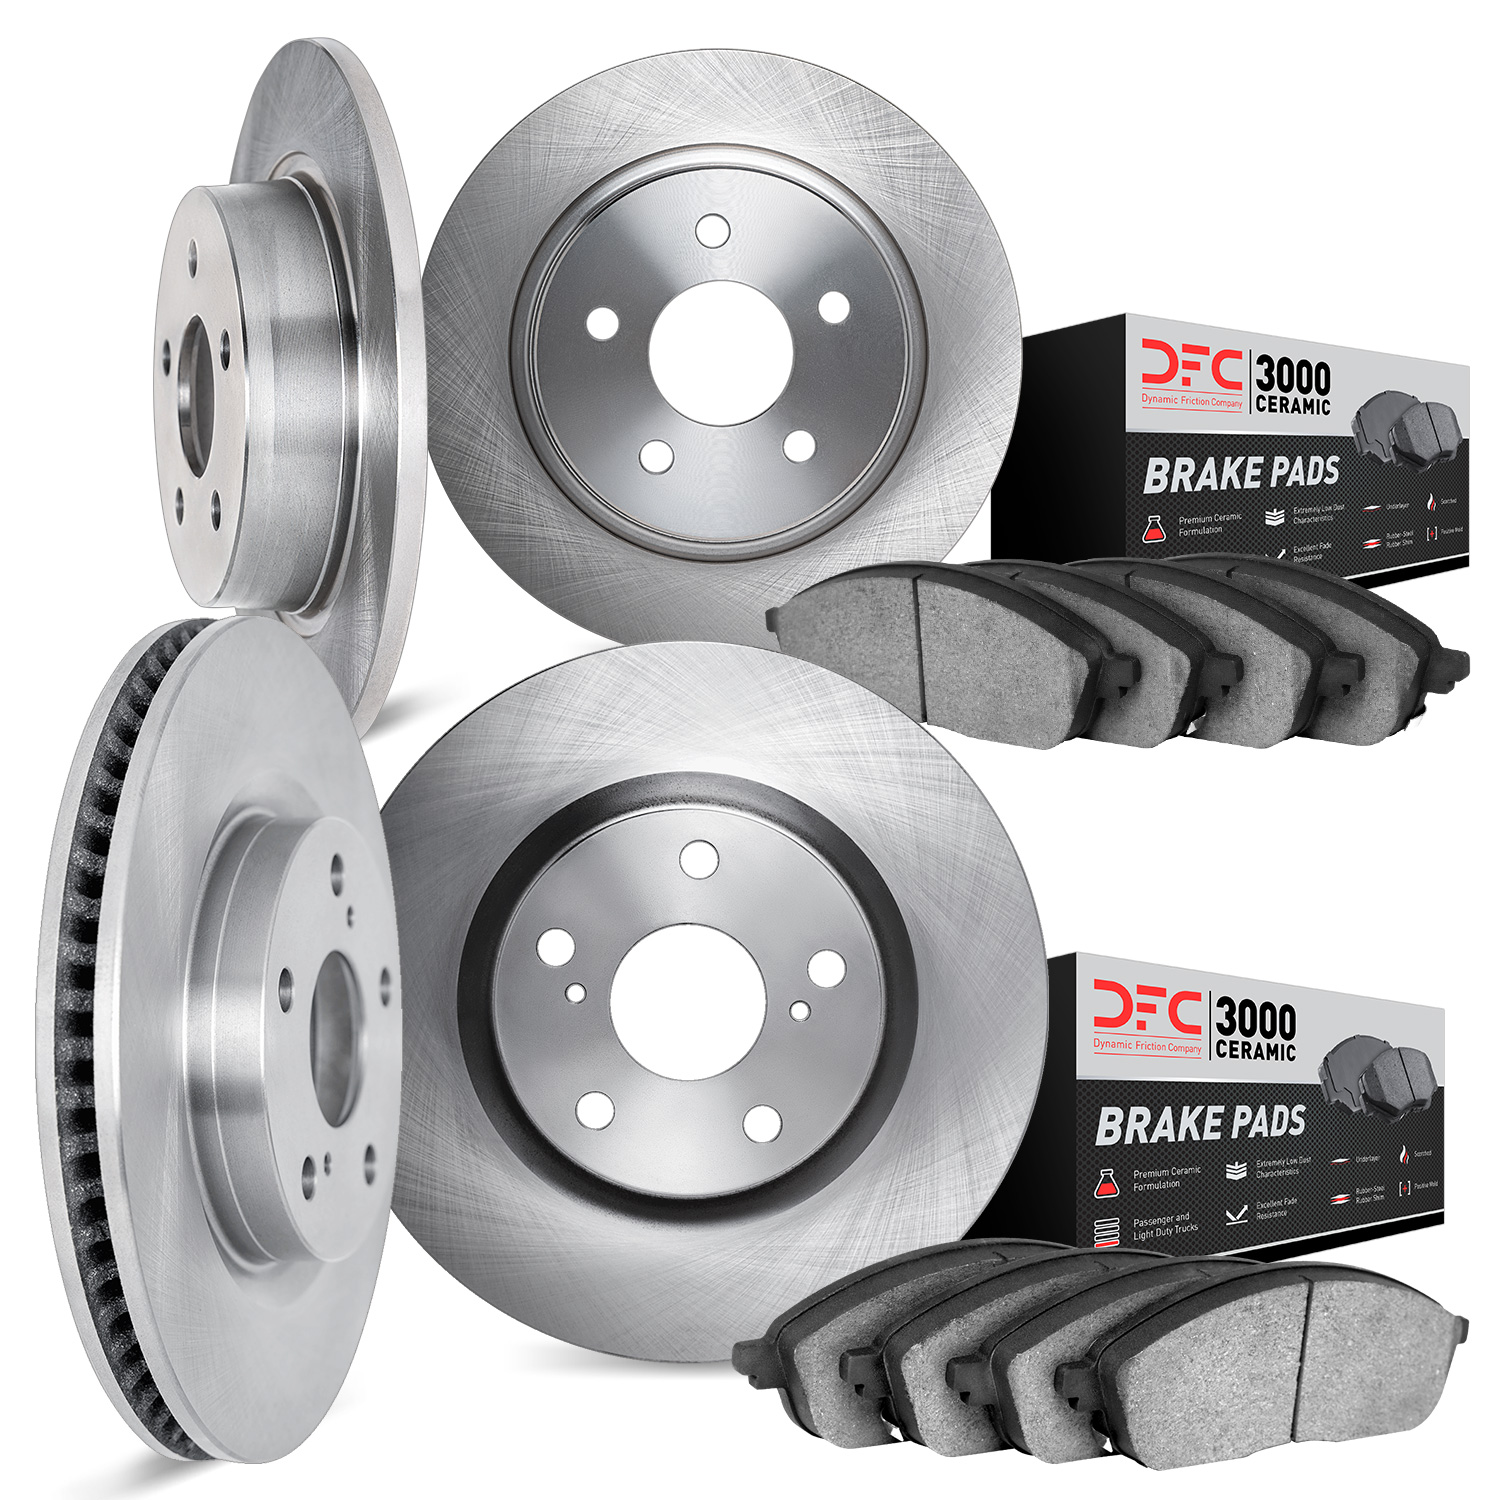 6304-76051 Brake Rotors with 3000-Series Ceramic Brake Pads Kit, 2004-2007 Lexus/Toyota/Scion, Position: Front and Rear